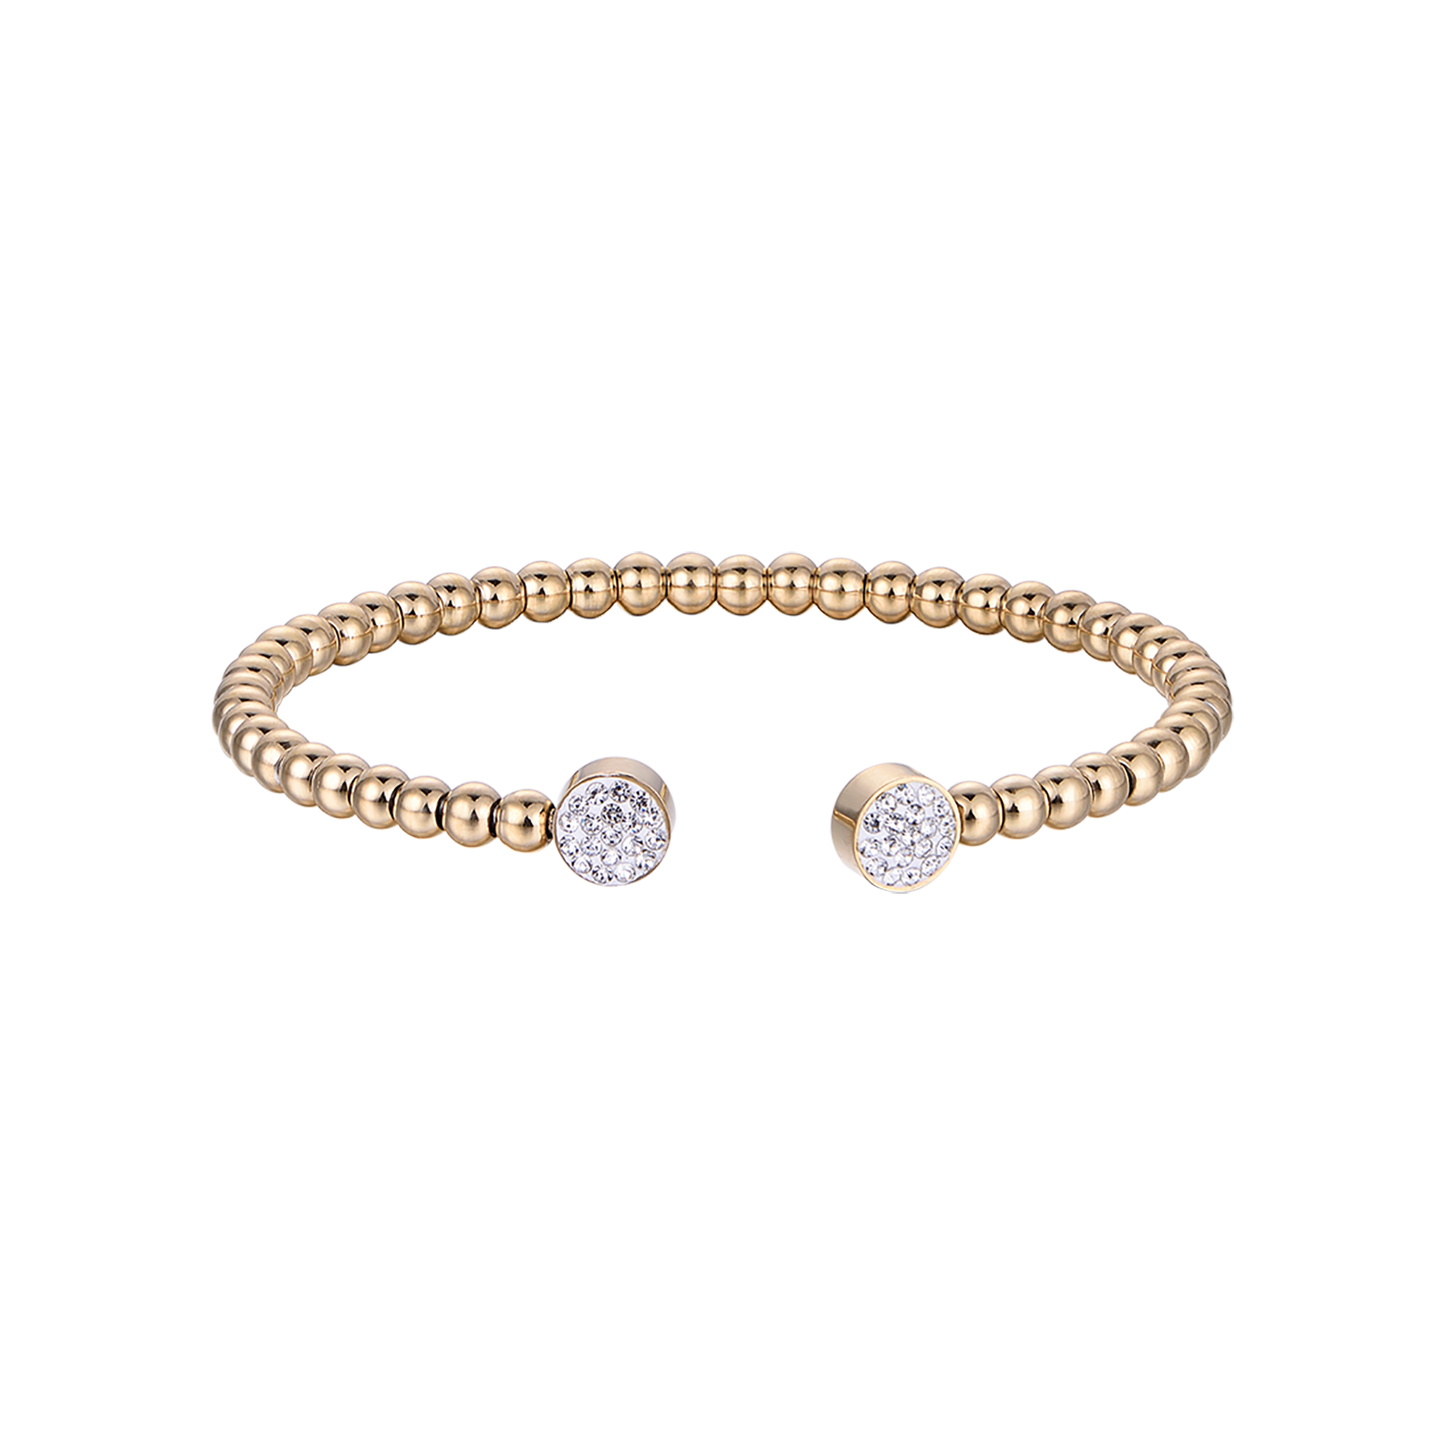 IP GOLD STEEL BRACELET WITH WHITE CRYSTALS Luca Barra